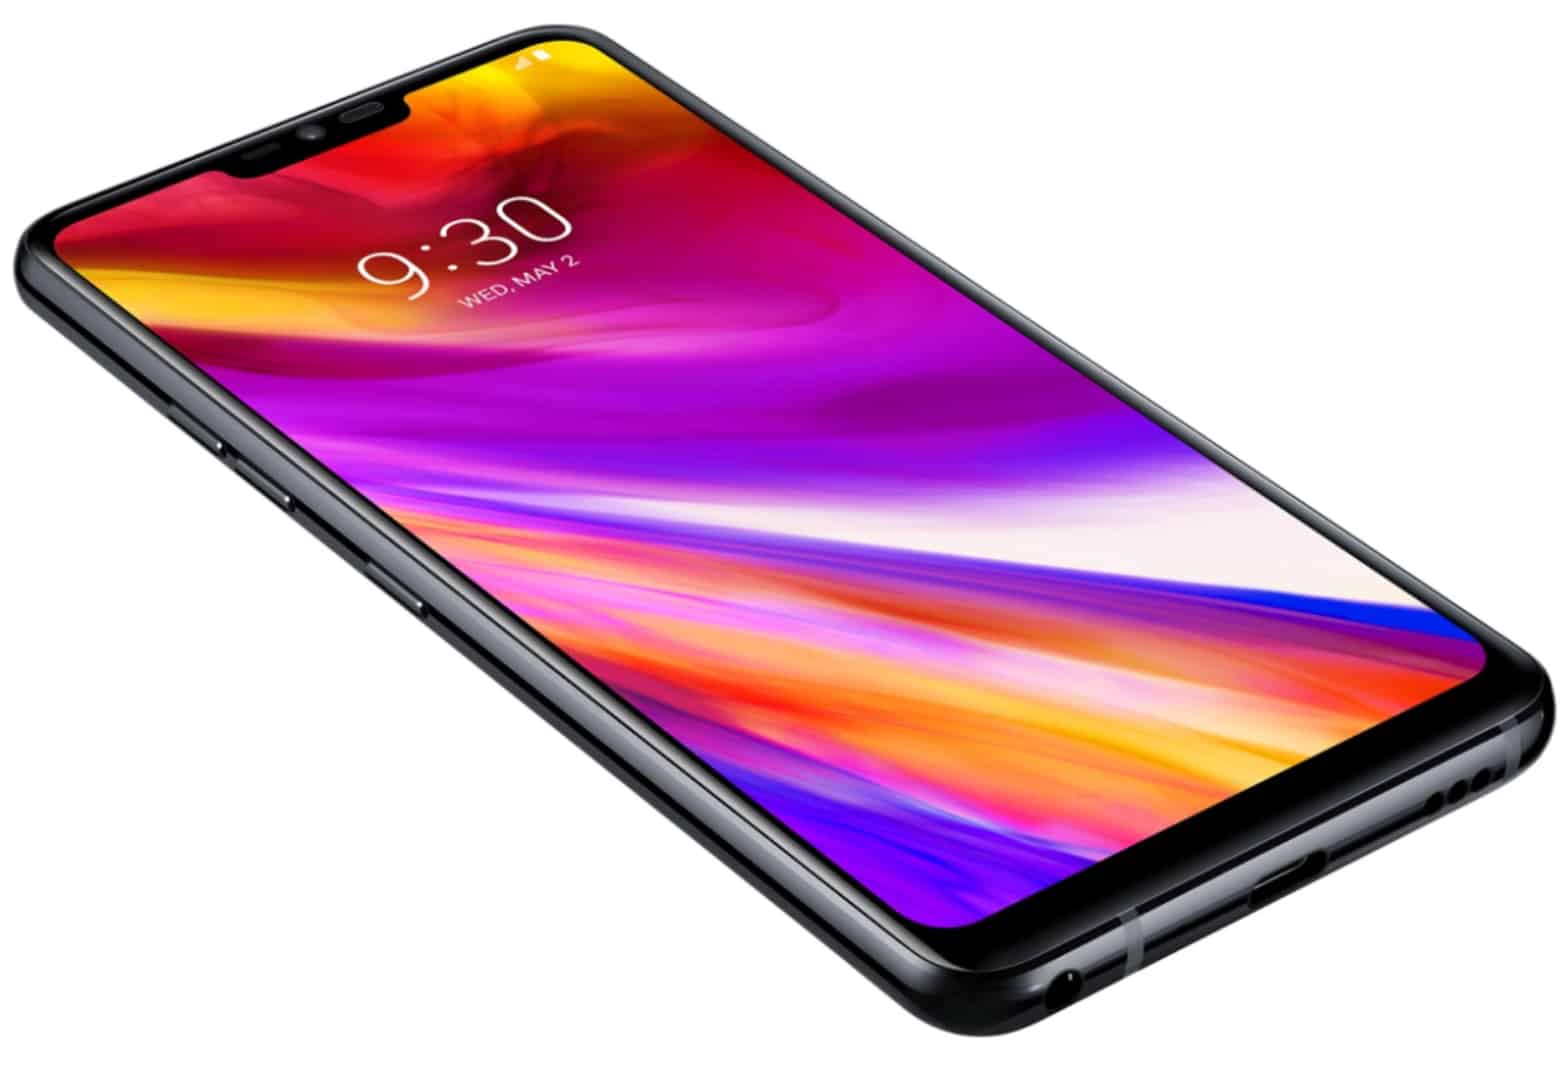 LG G7 ThinQ with MLCD+ display